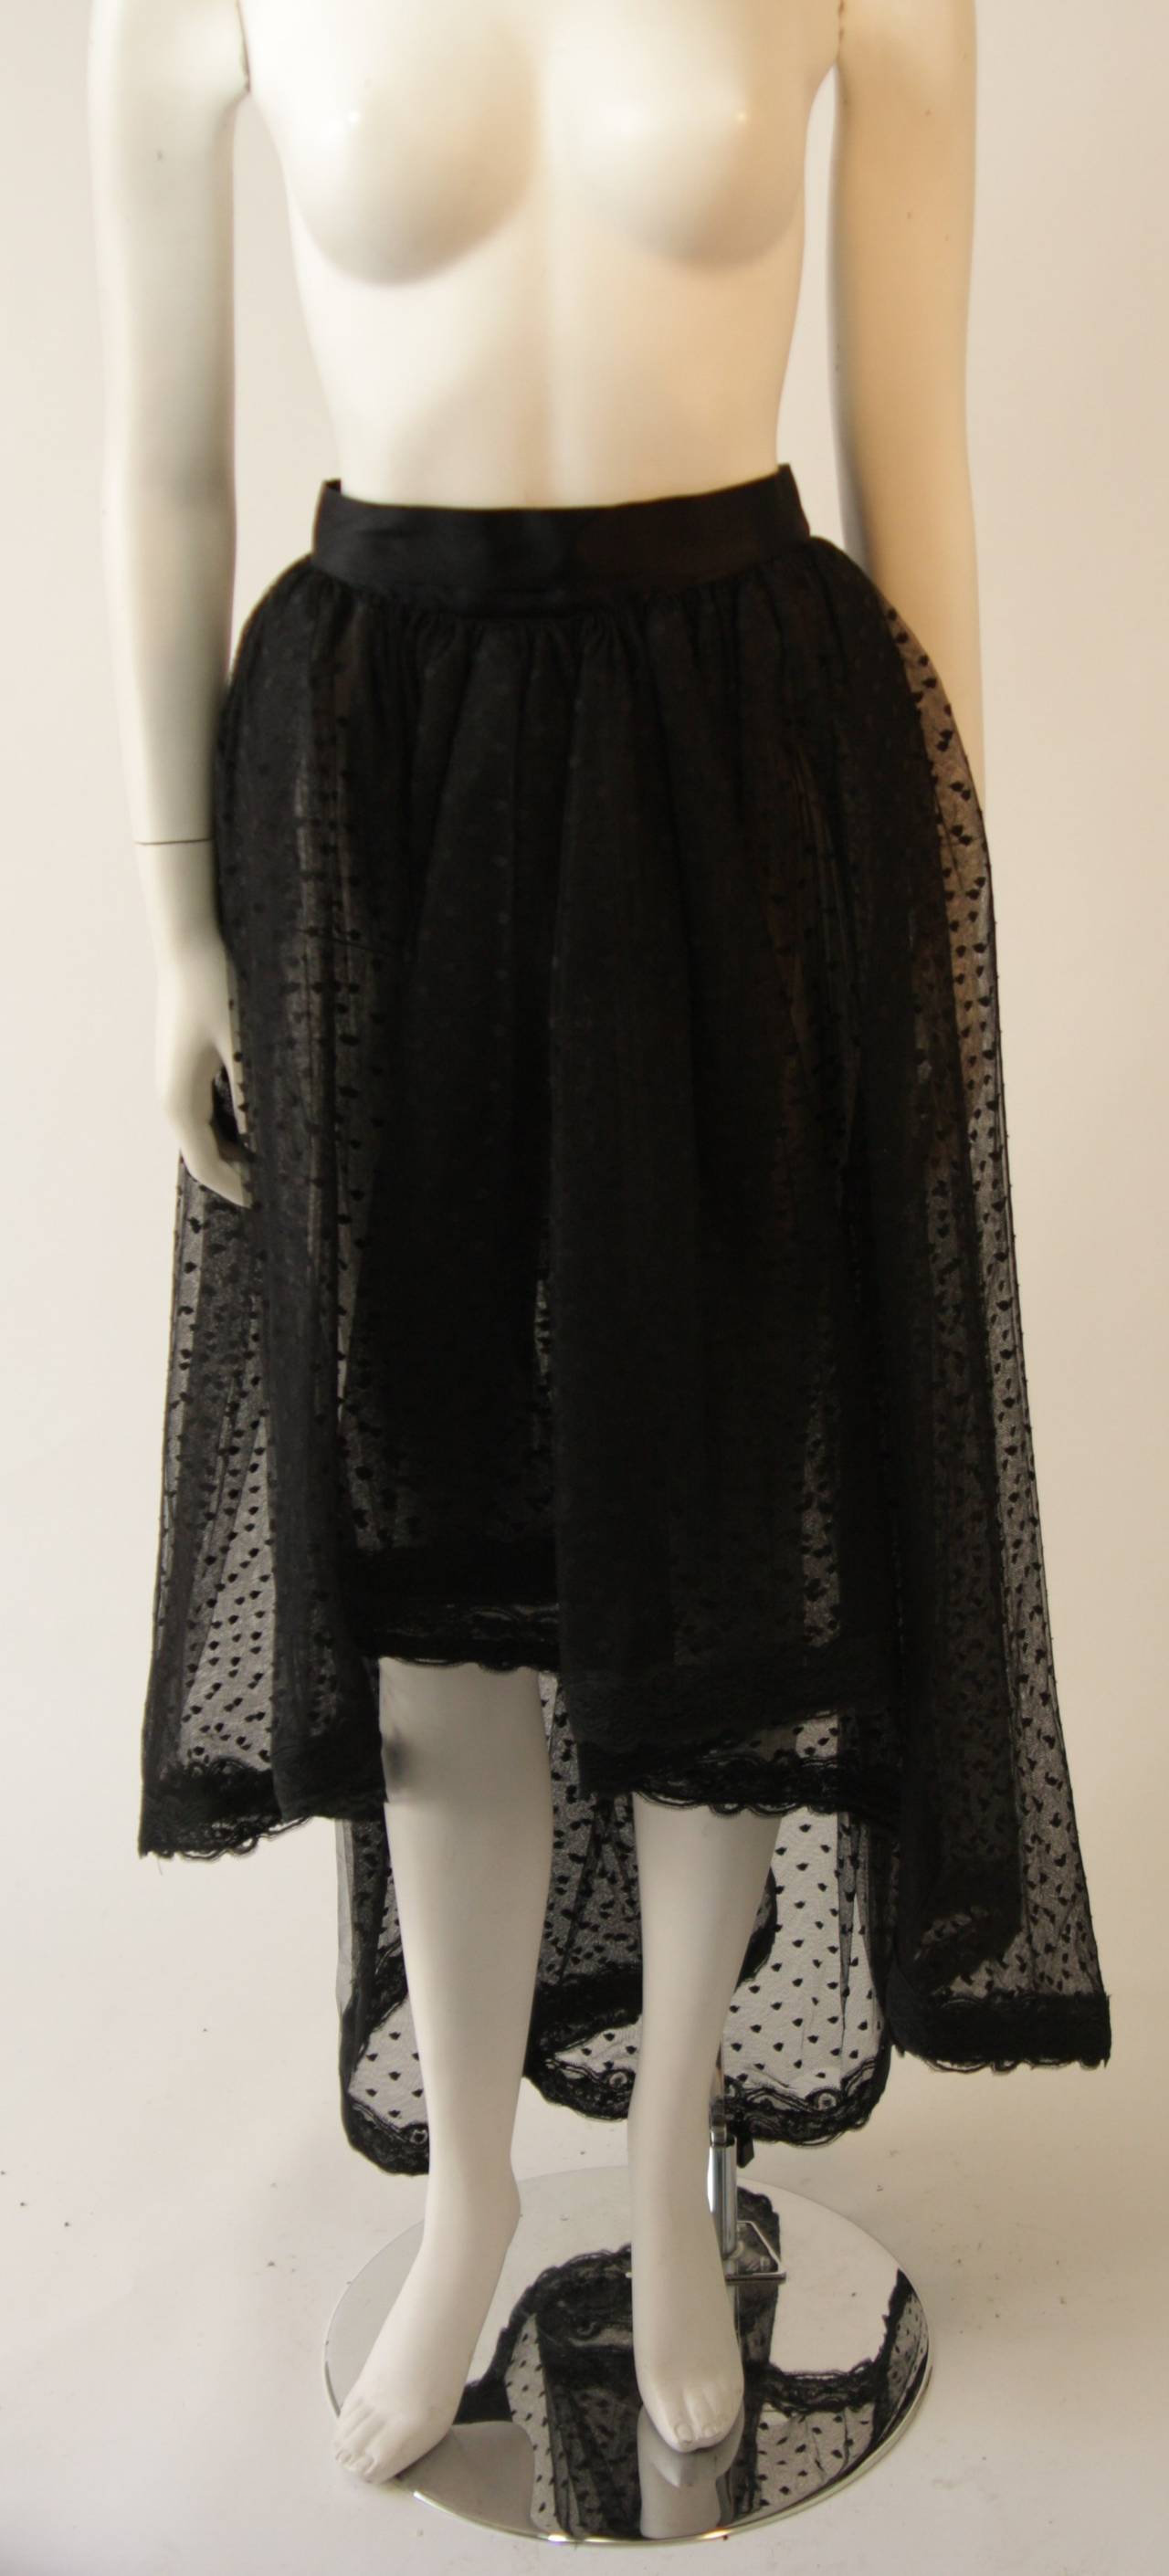 Bill Blass Black Polka Dot and Lace Cocktail Dress with Over-Skirt 5